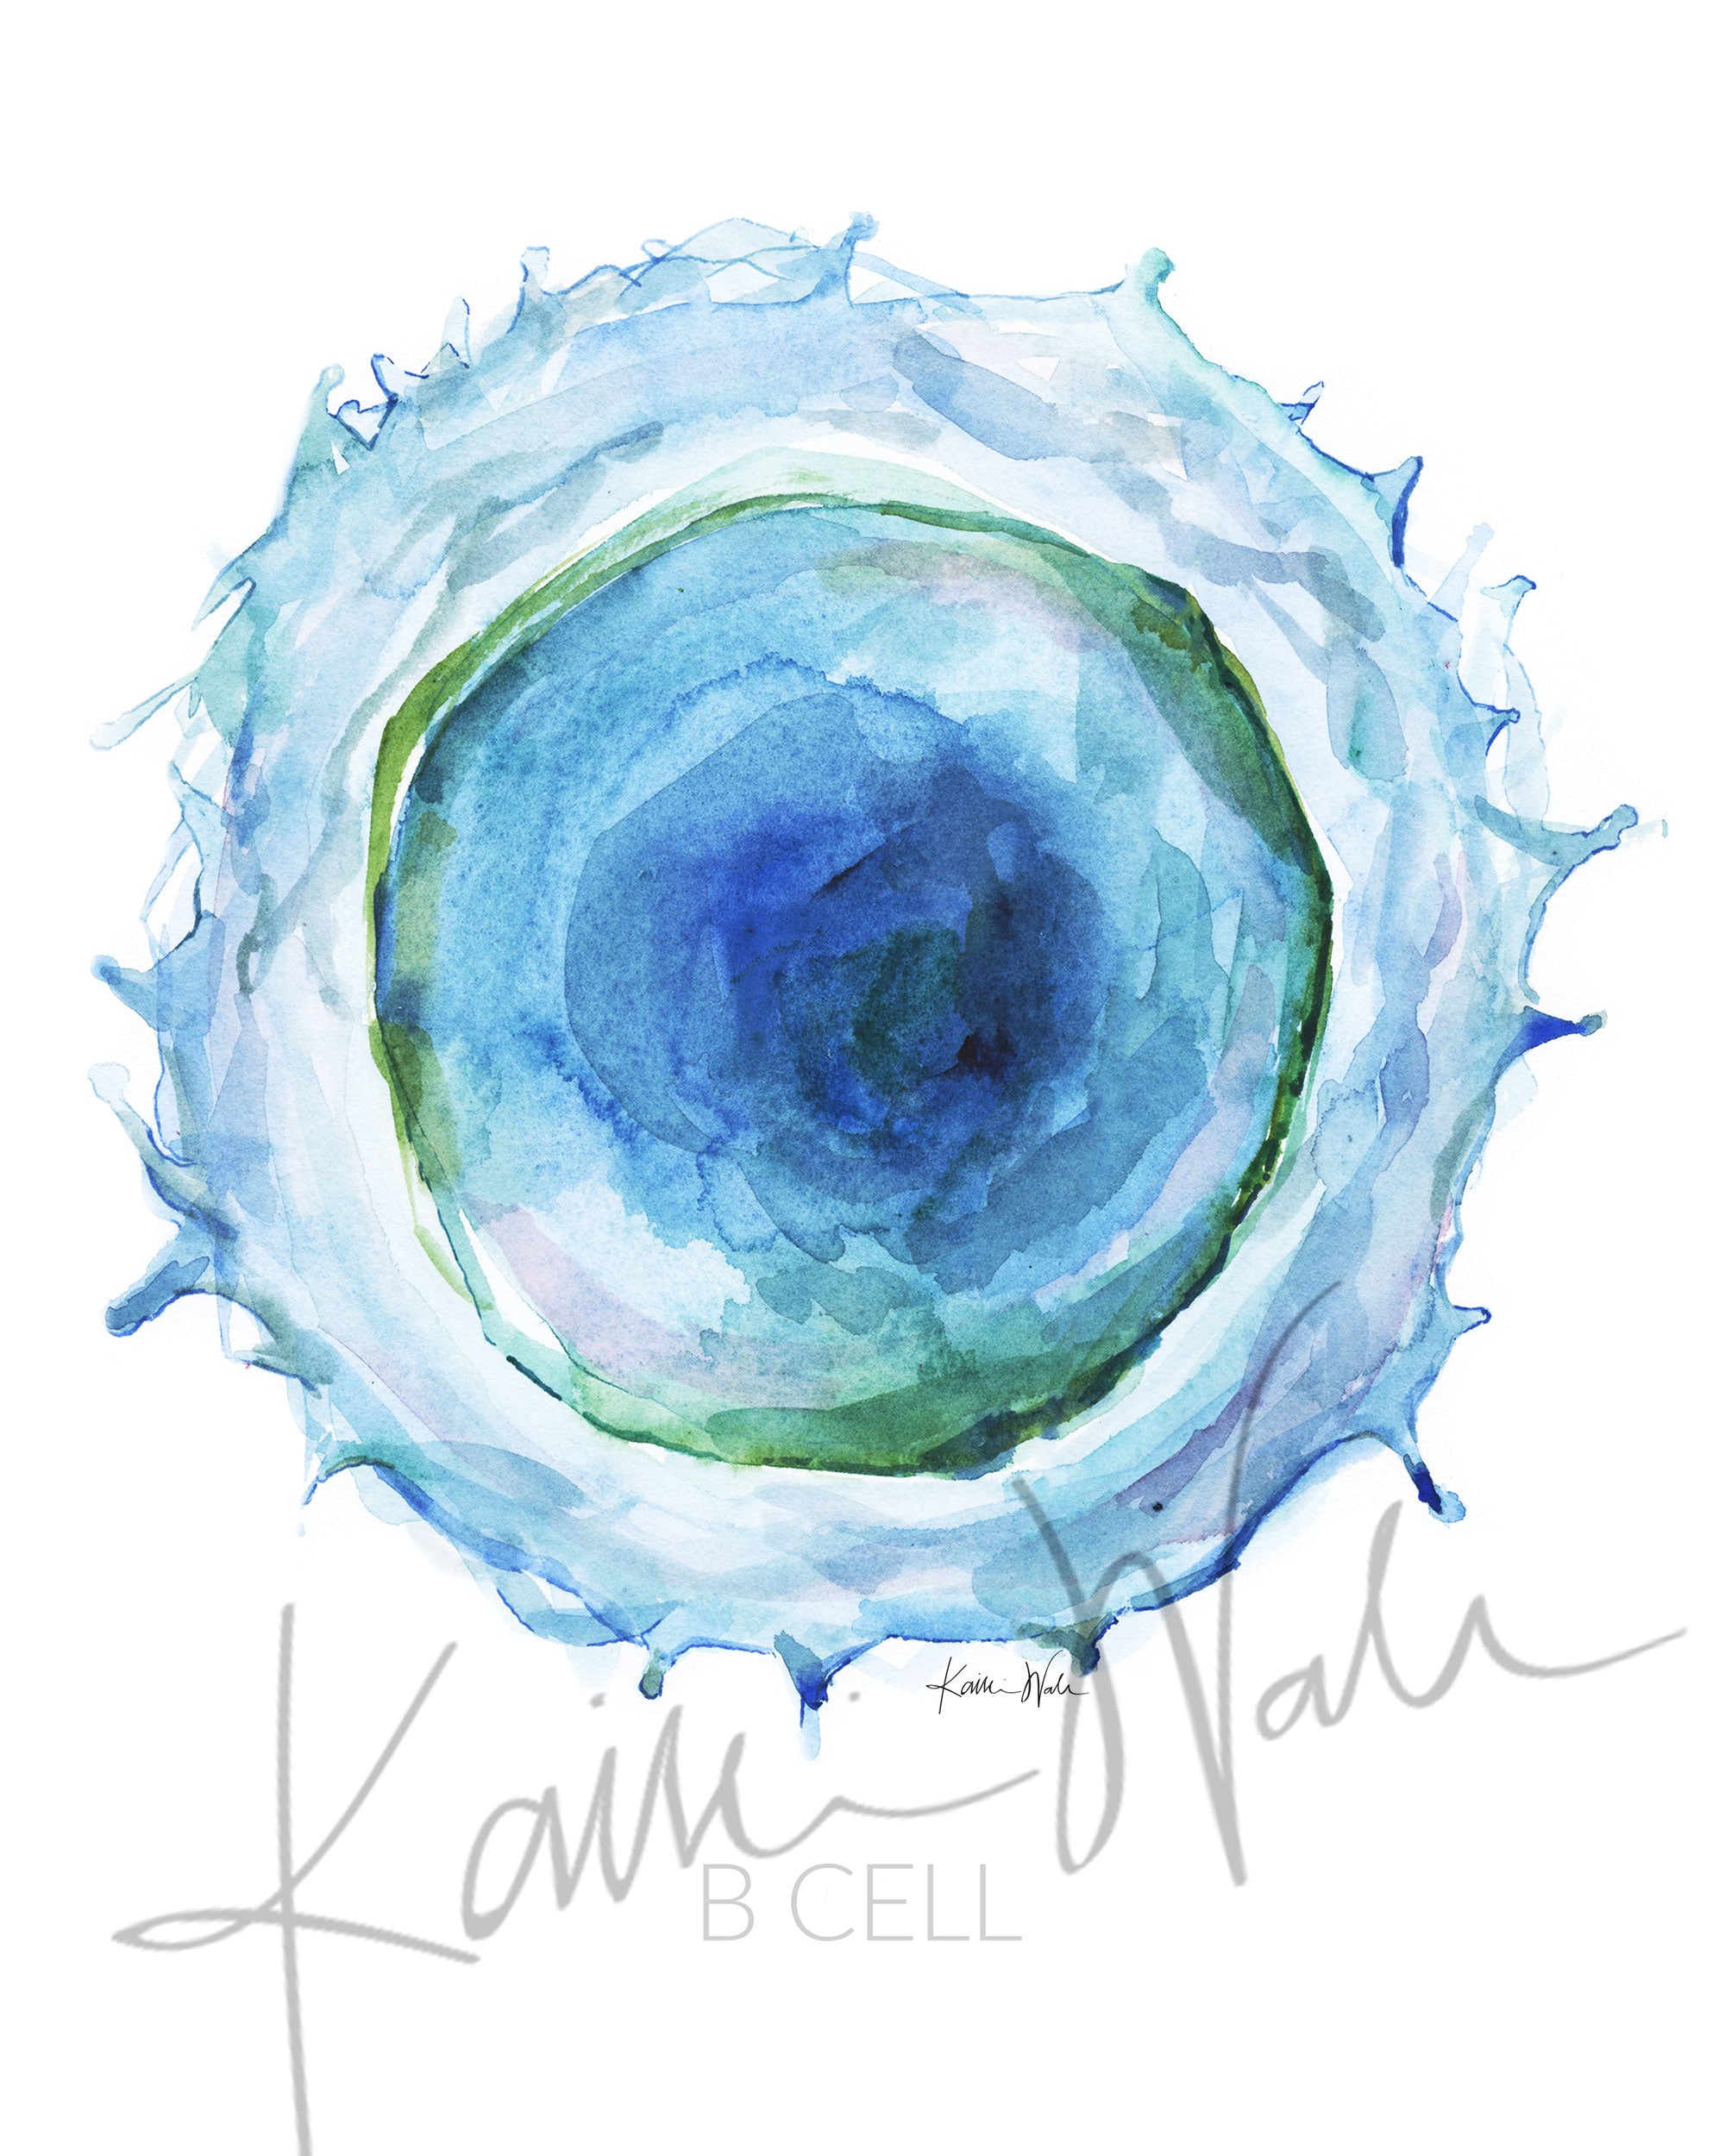 Unframed watercolor painting of a B cell.